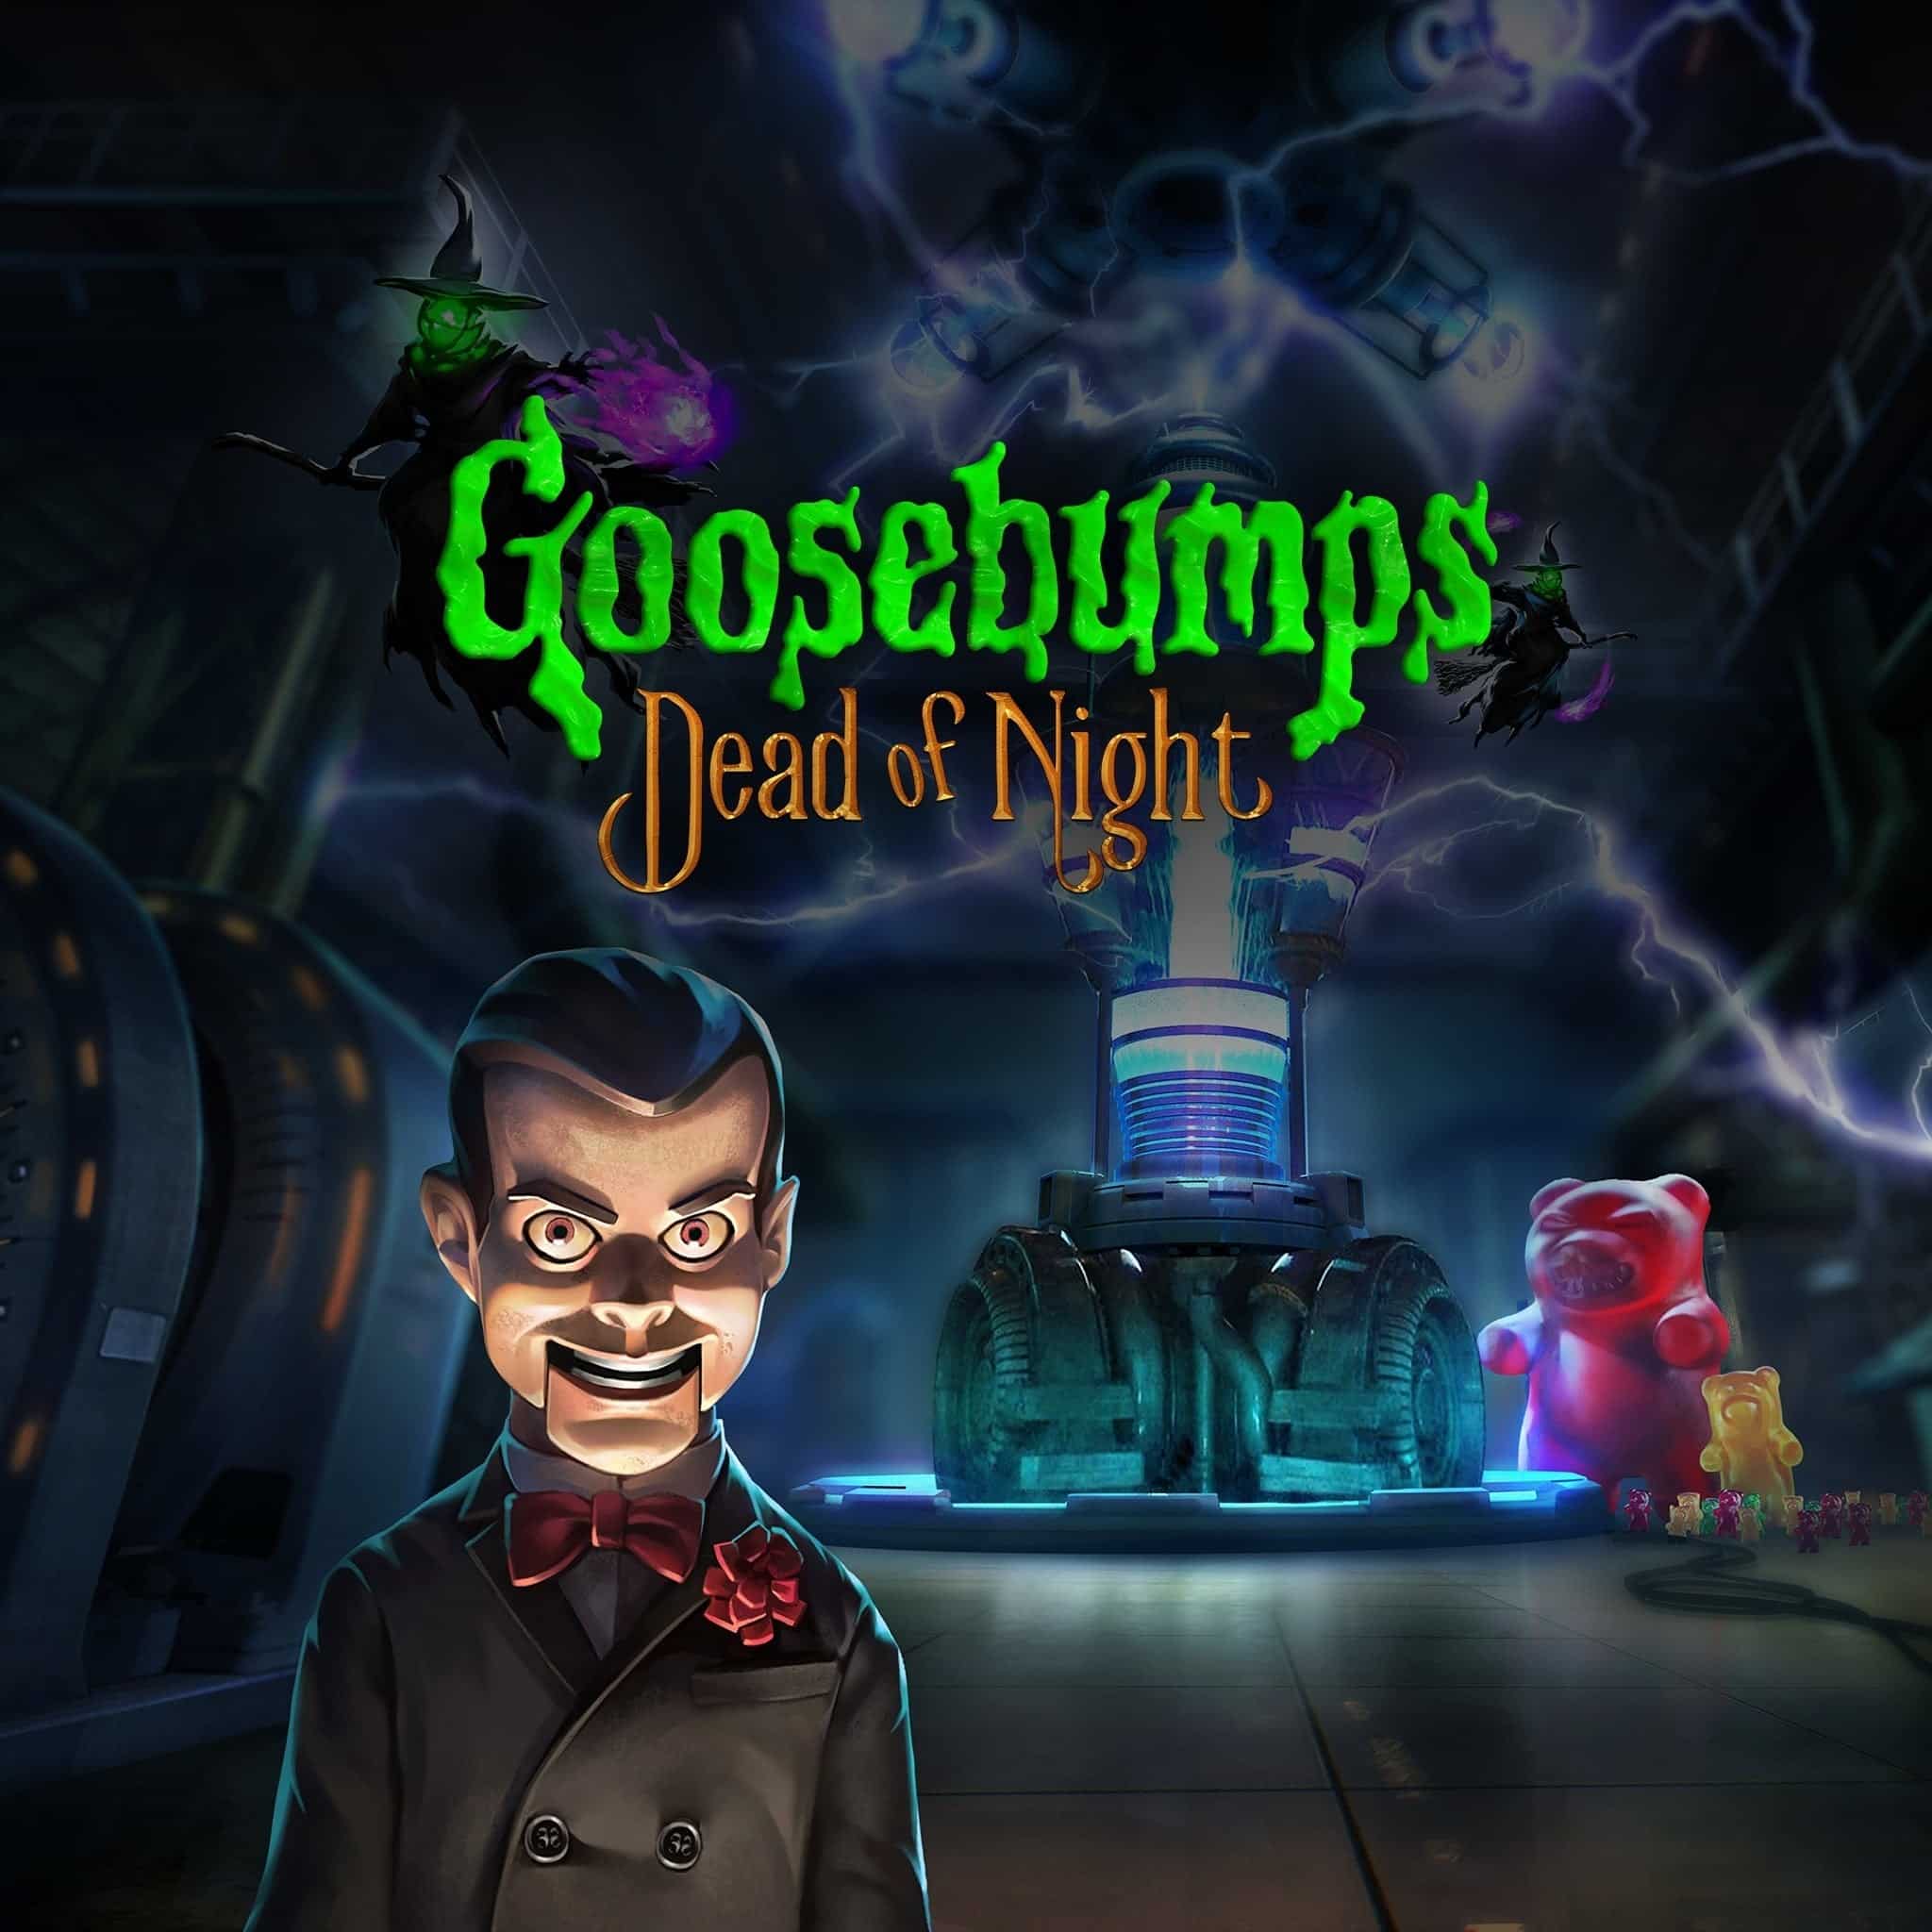 Goosebumps Dead of Night player count stats